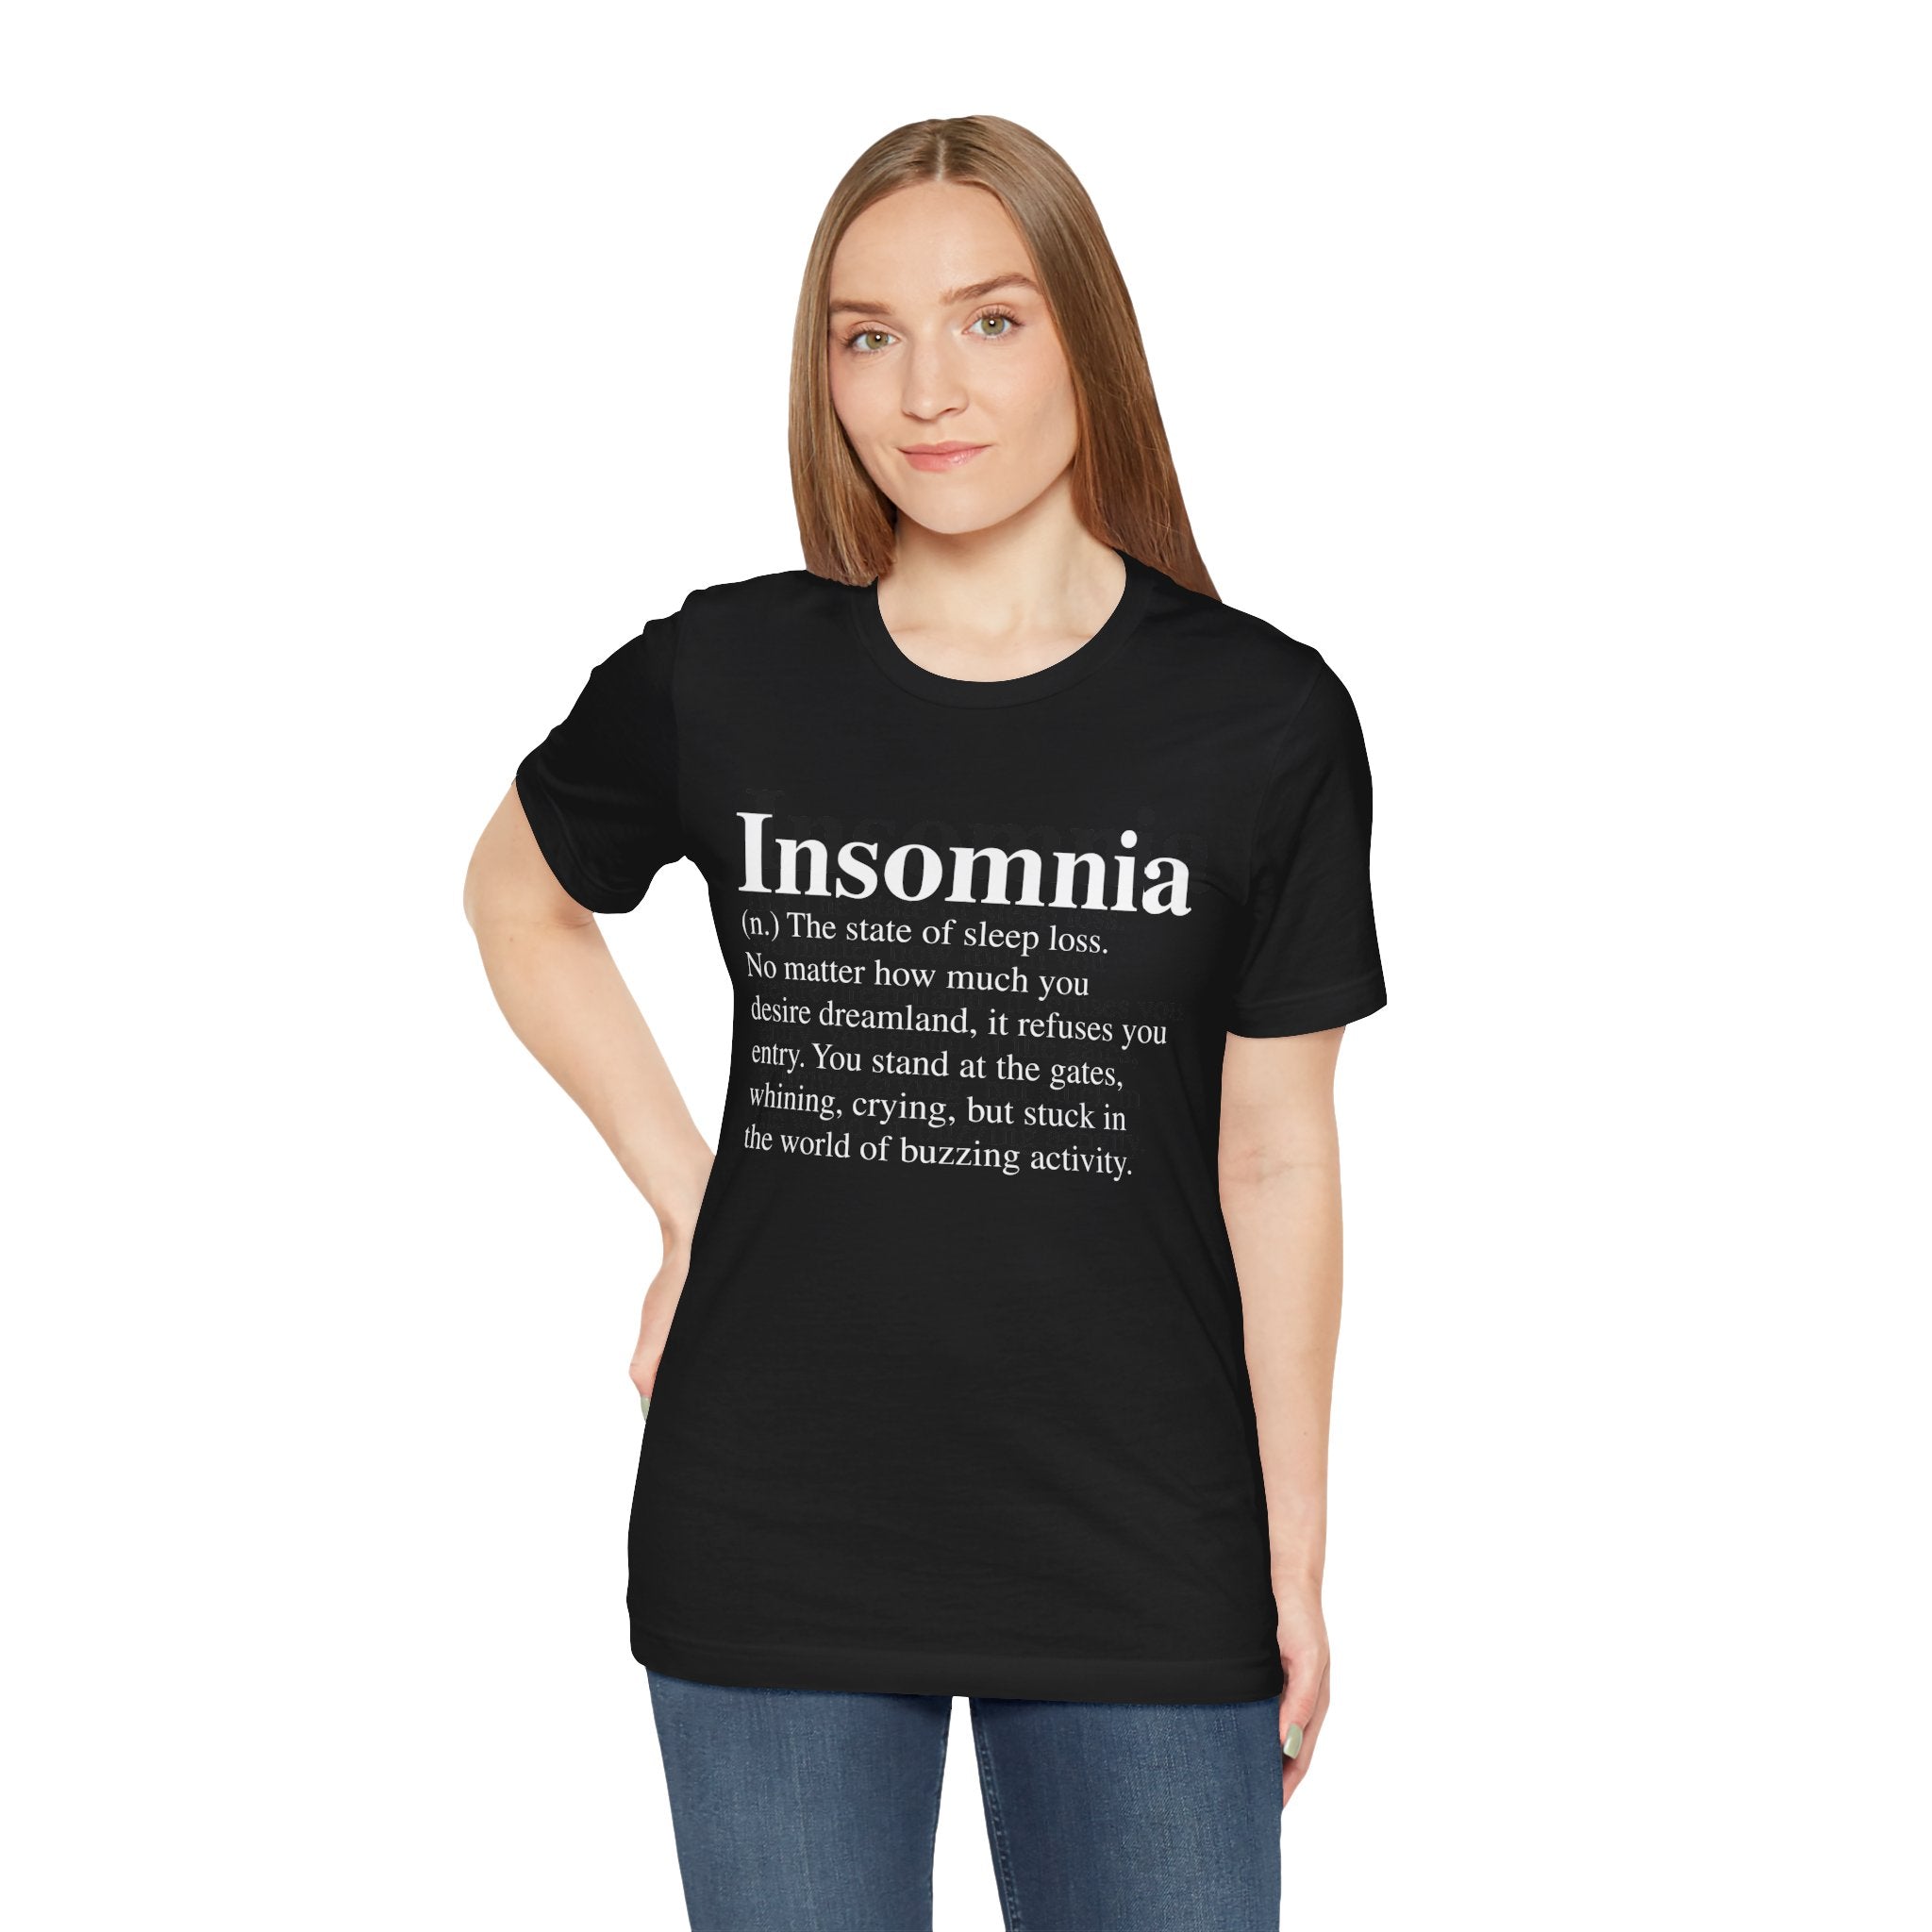 Young woman in an Insomnia T-Shirt.